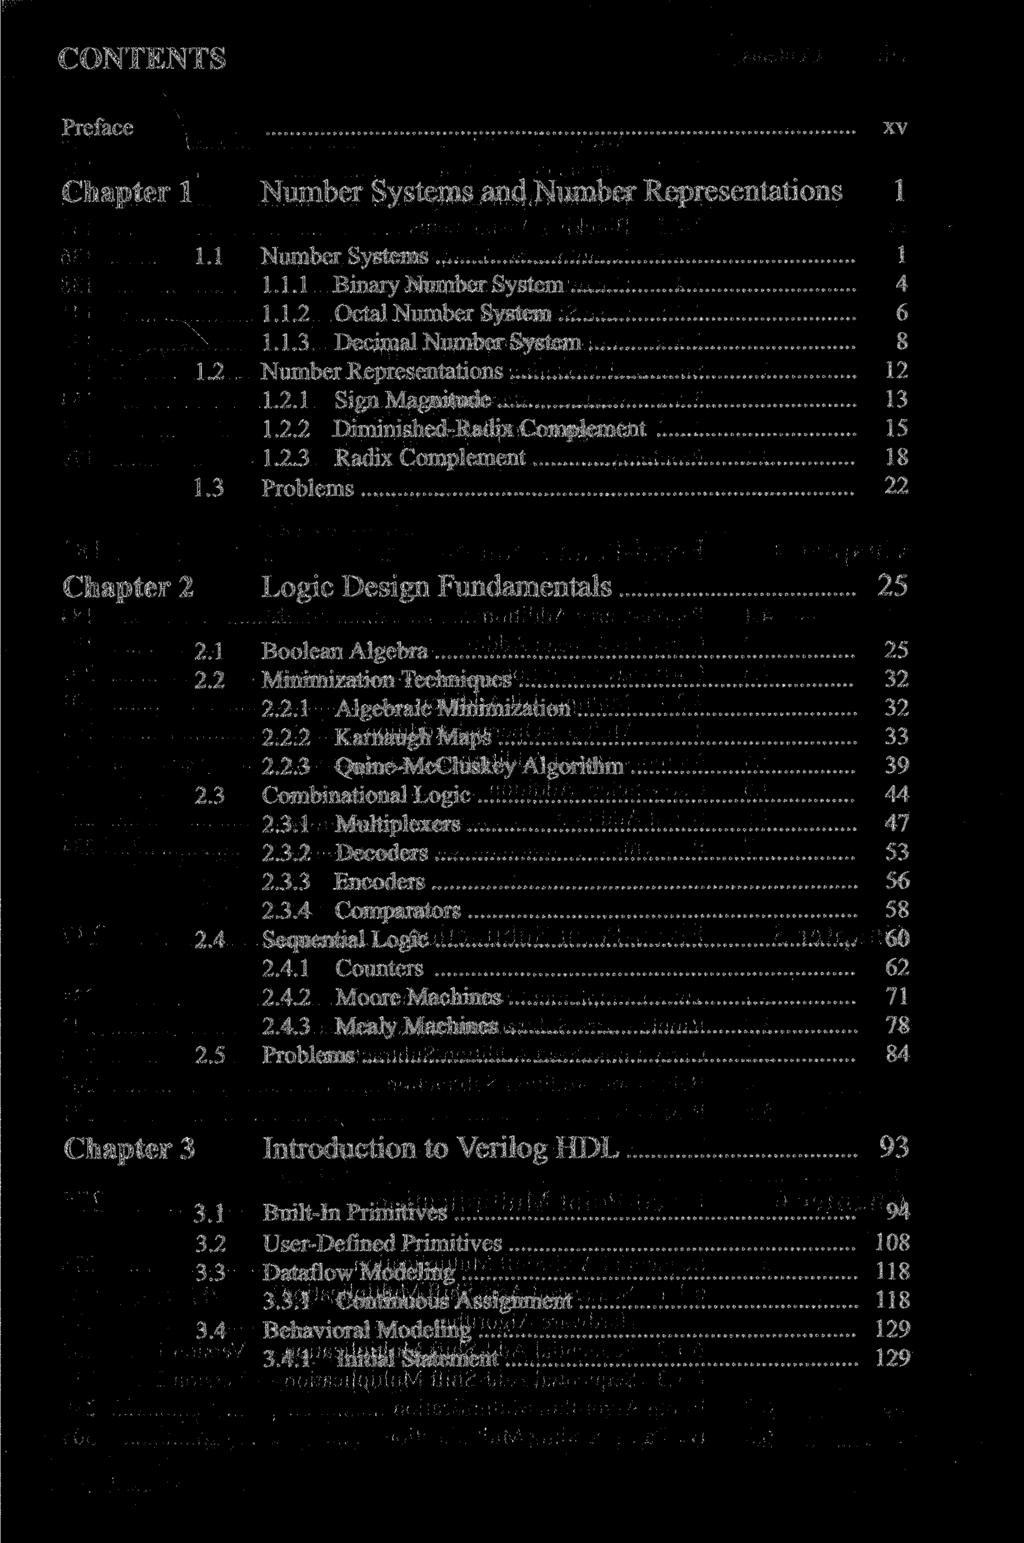 CONTENTS Preface xv Chapter 1 Number Systems and Number Representations 1 1.1 Number Systems 1 1.1.1 Binary Number System 4 1.1.2 Octal Number System 6 1.1.3 Decimal Number System 8 1.